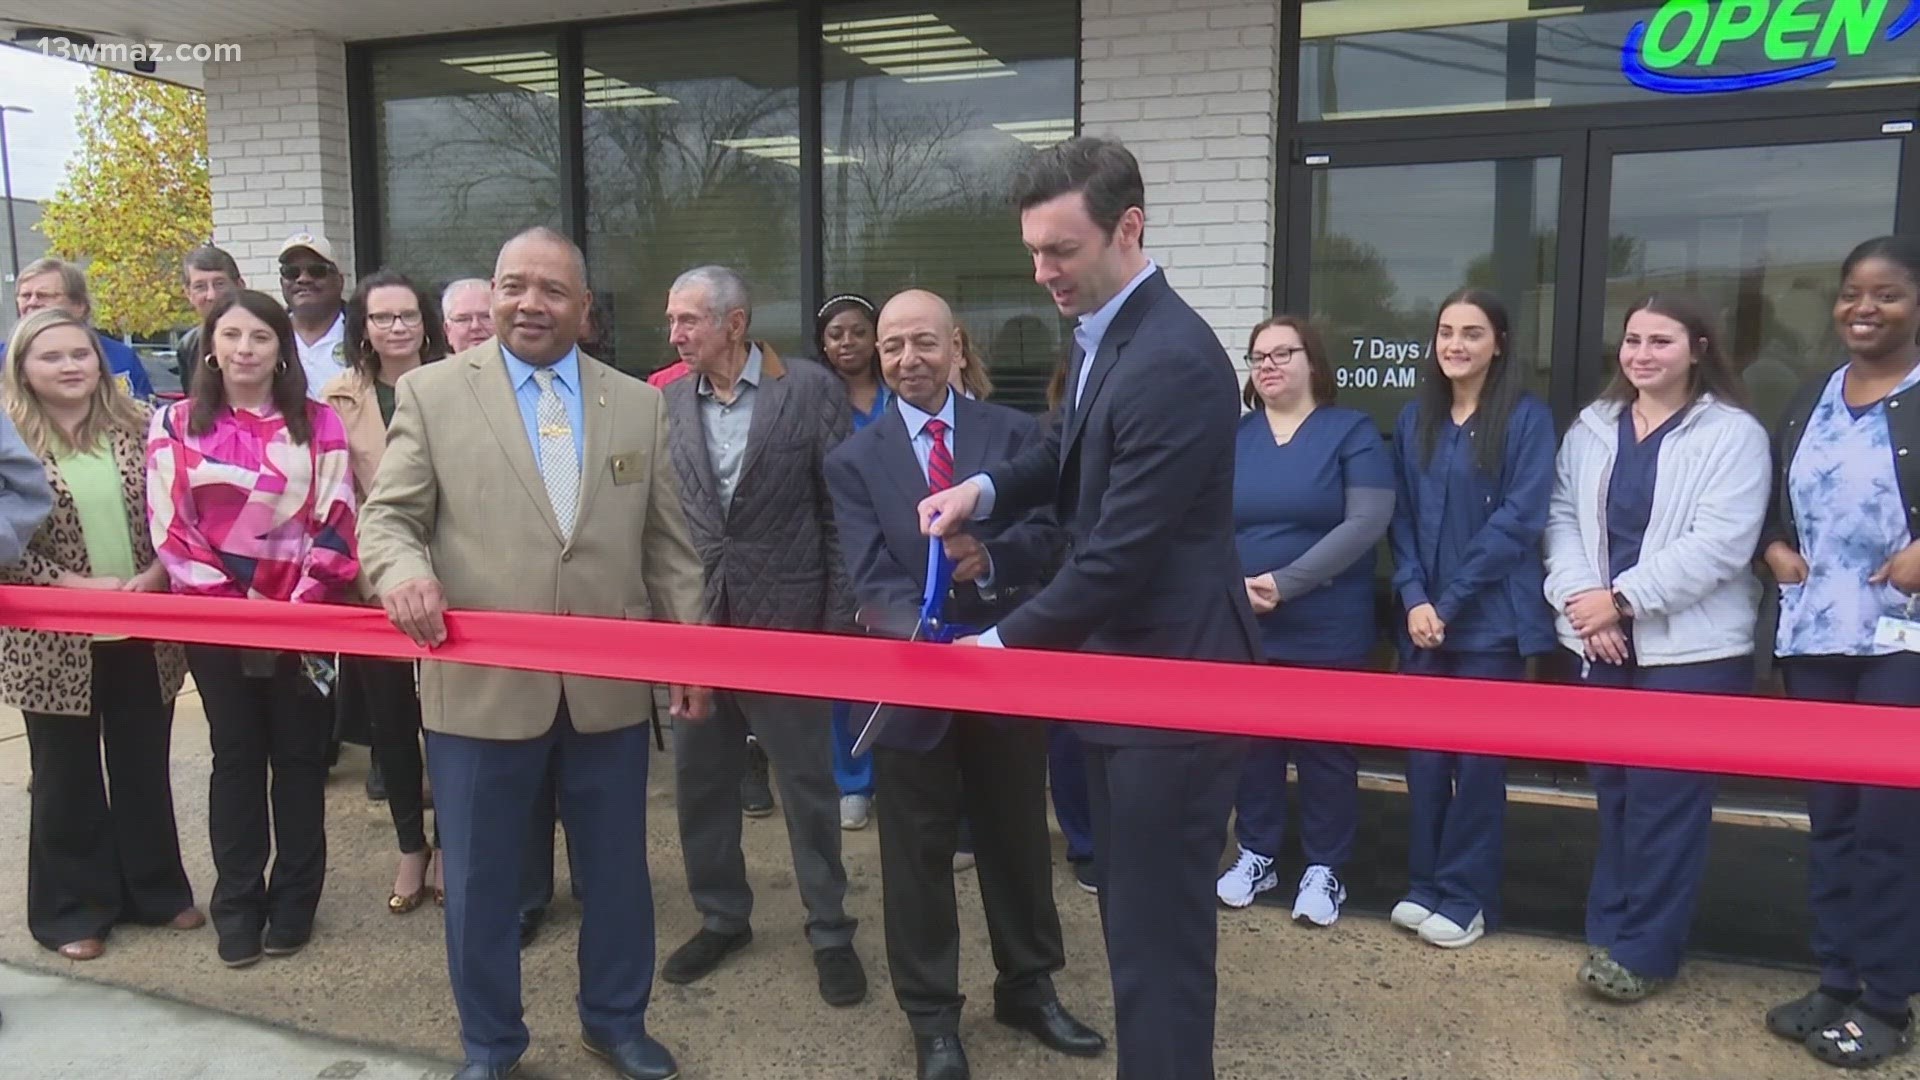 With 4 new exam rooms, nursing stations, and more, CareConnect Convenient Care expects to see around 1,300 patients a month getting the healthcare they need.